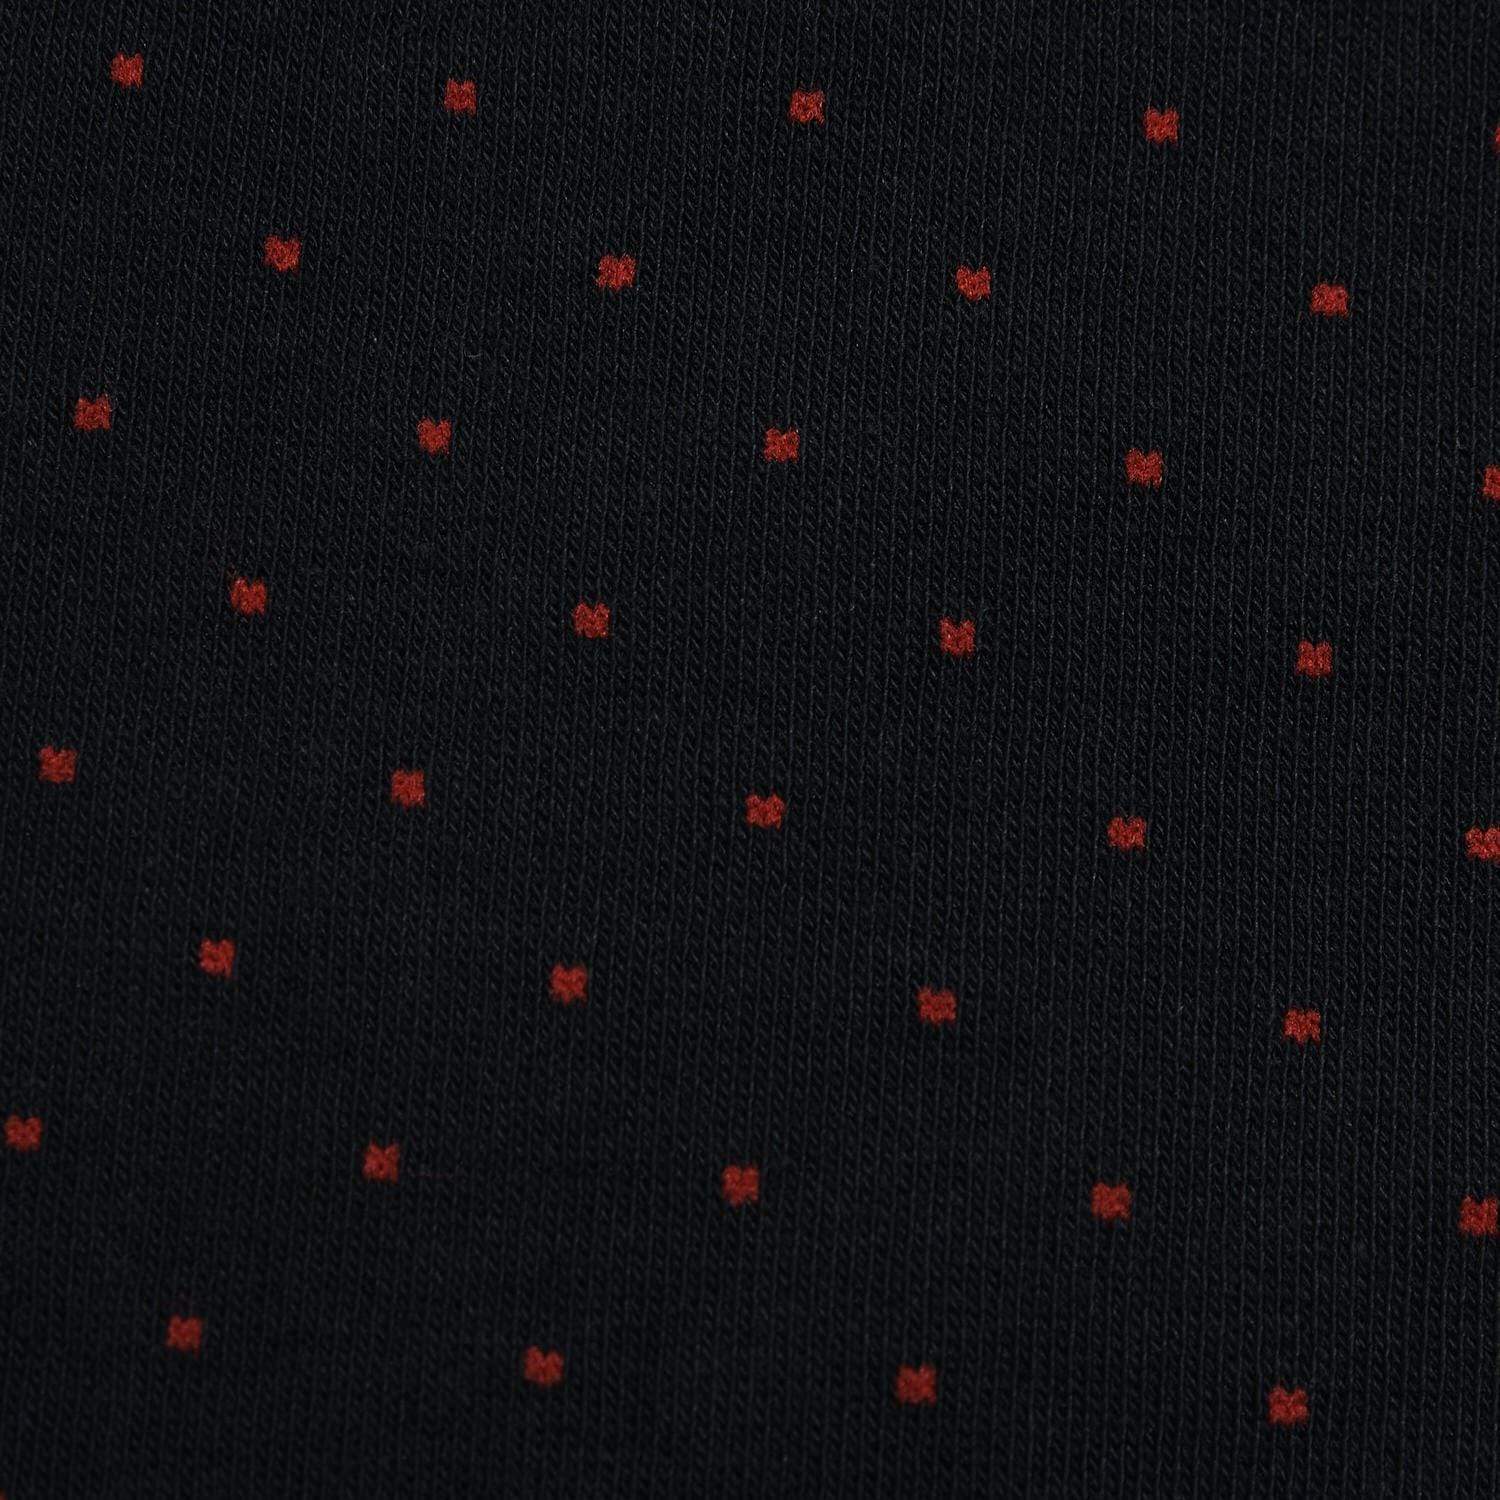 T.M.Lewin-Dot-Patterned-Socks-Navy-and-Red-61469-008